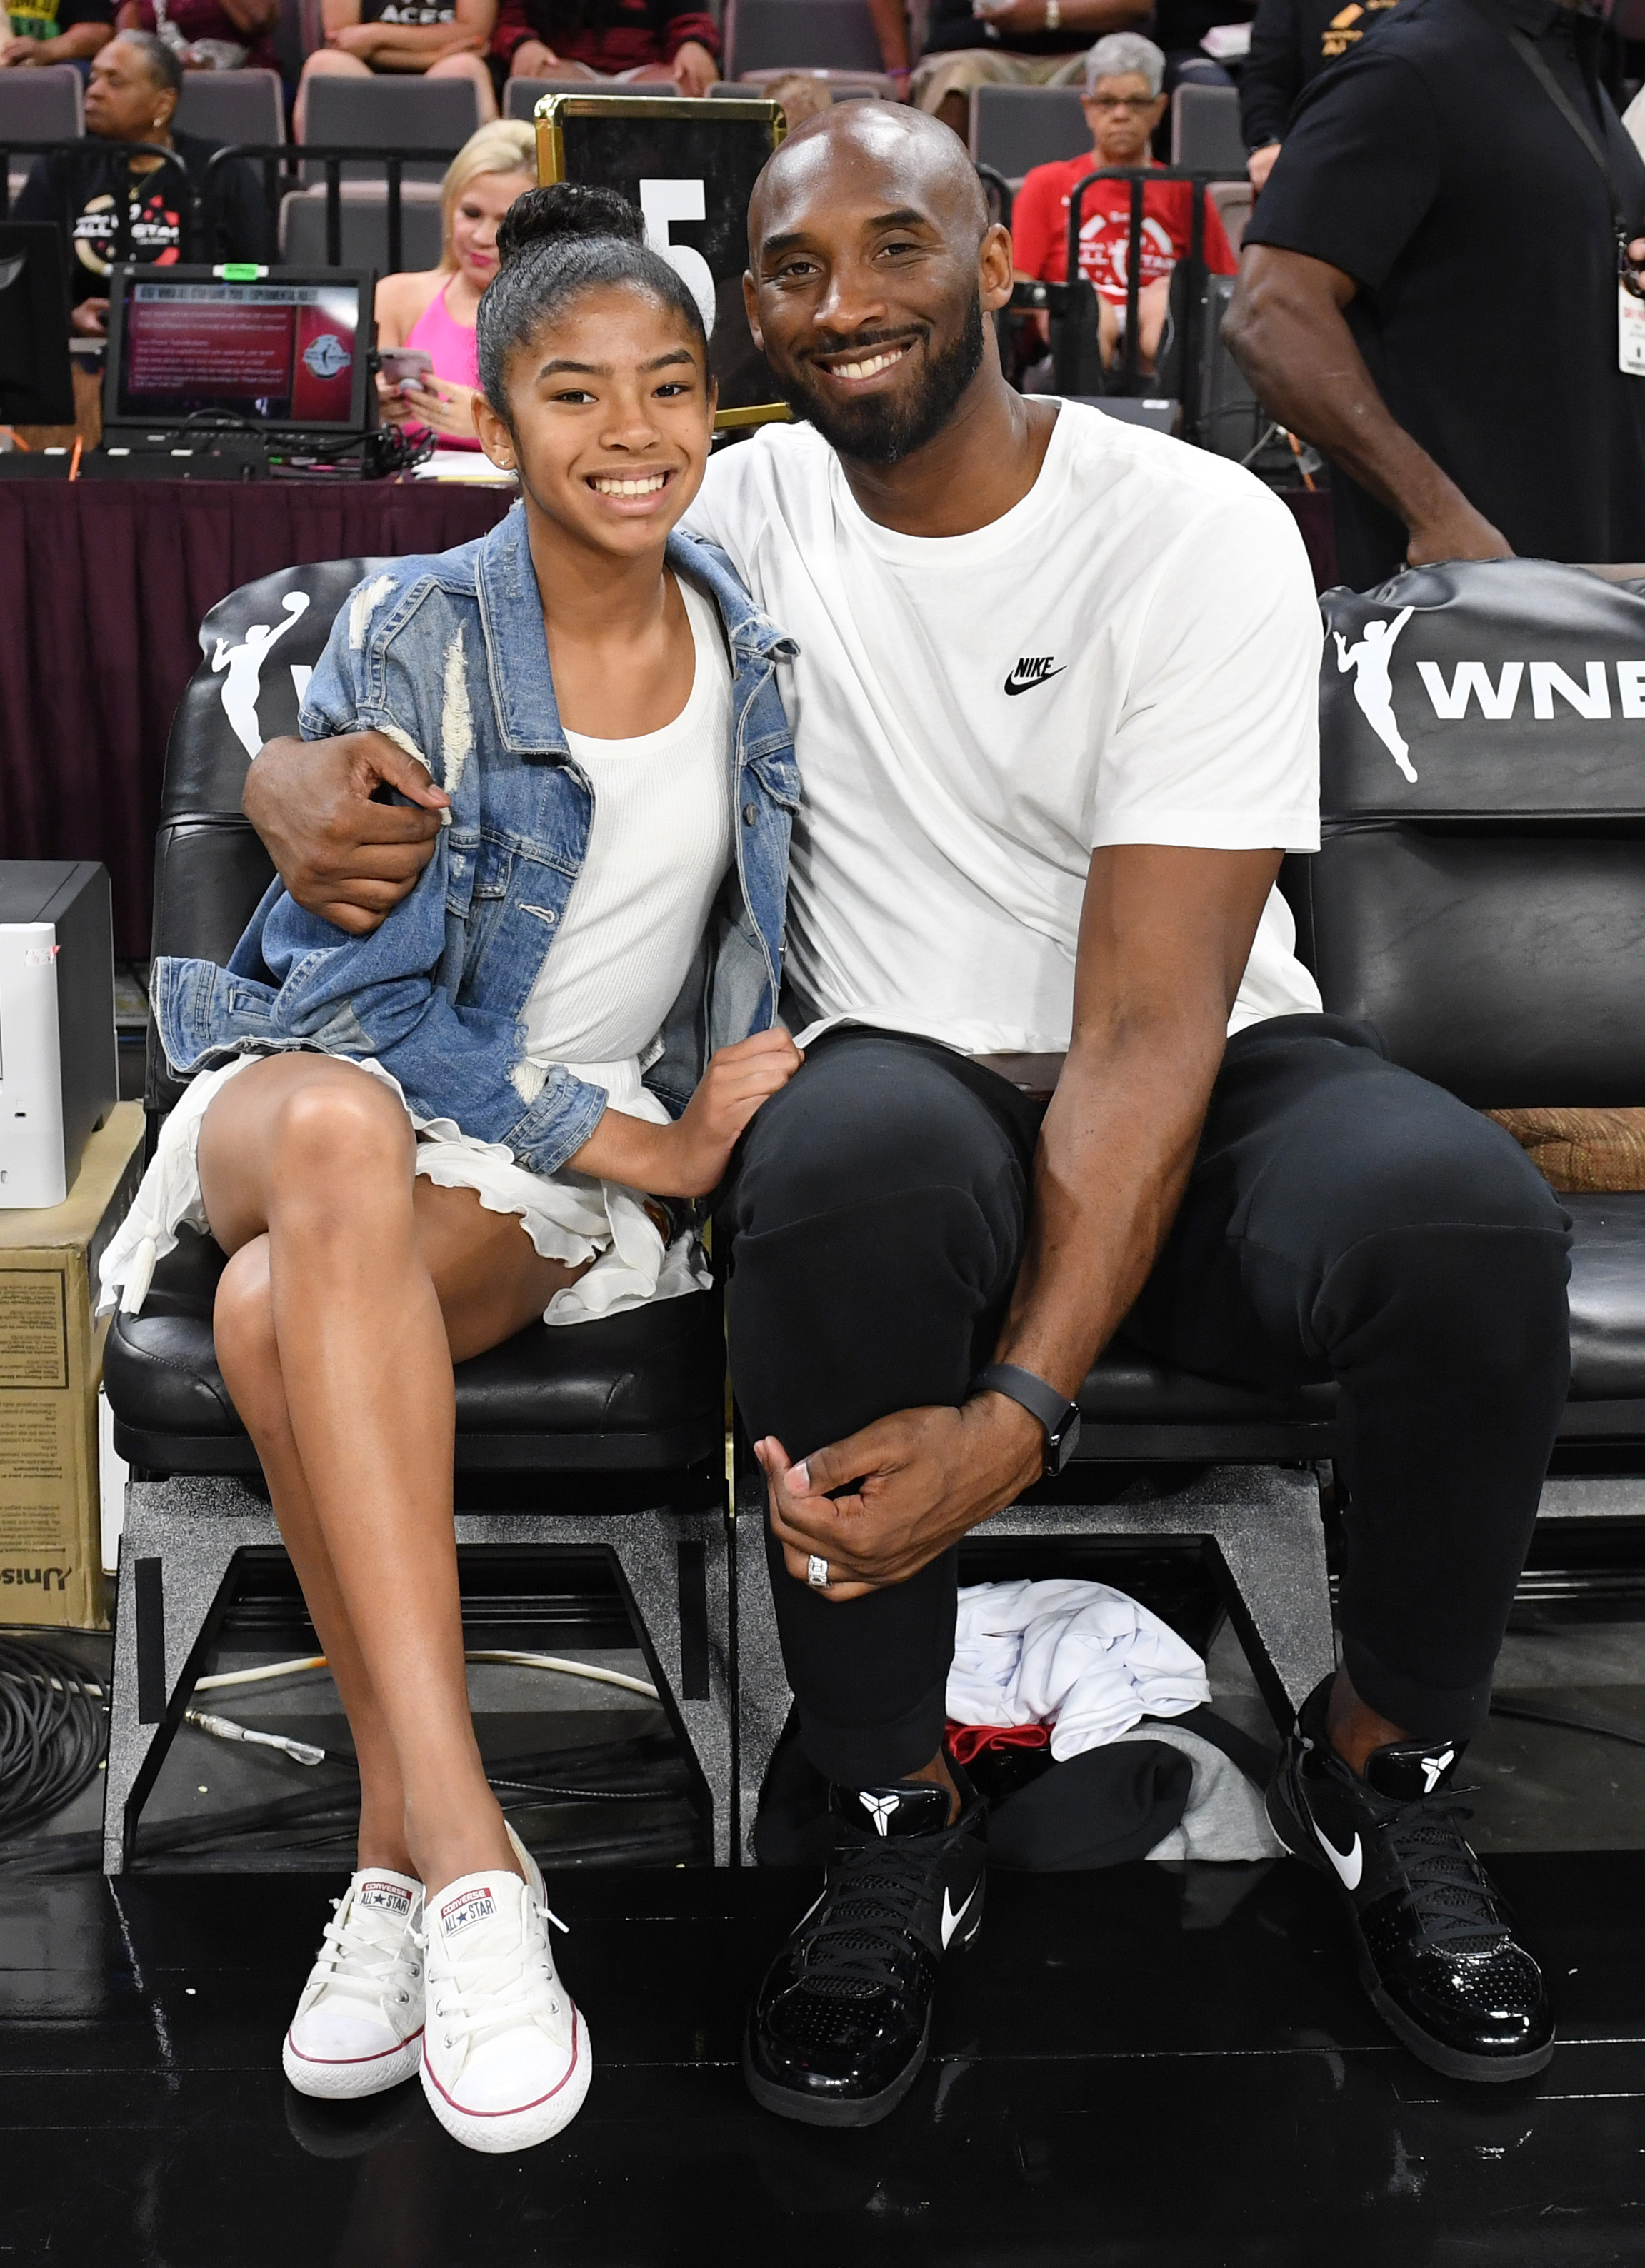 Gianna Bryant and her father, former NBA player Kobe Bryant, attend the WNBA All-Star Game 2019 at the Mandalay Bay Events Center in Las Vegas, Nevada